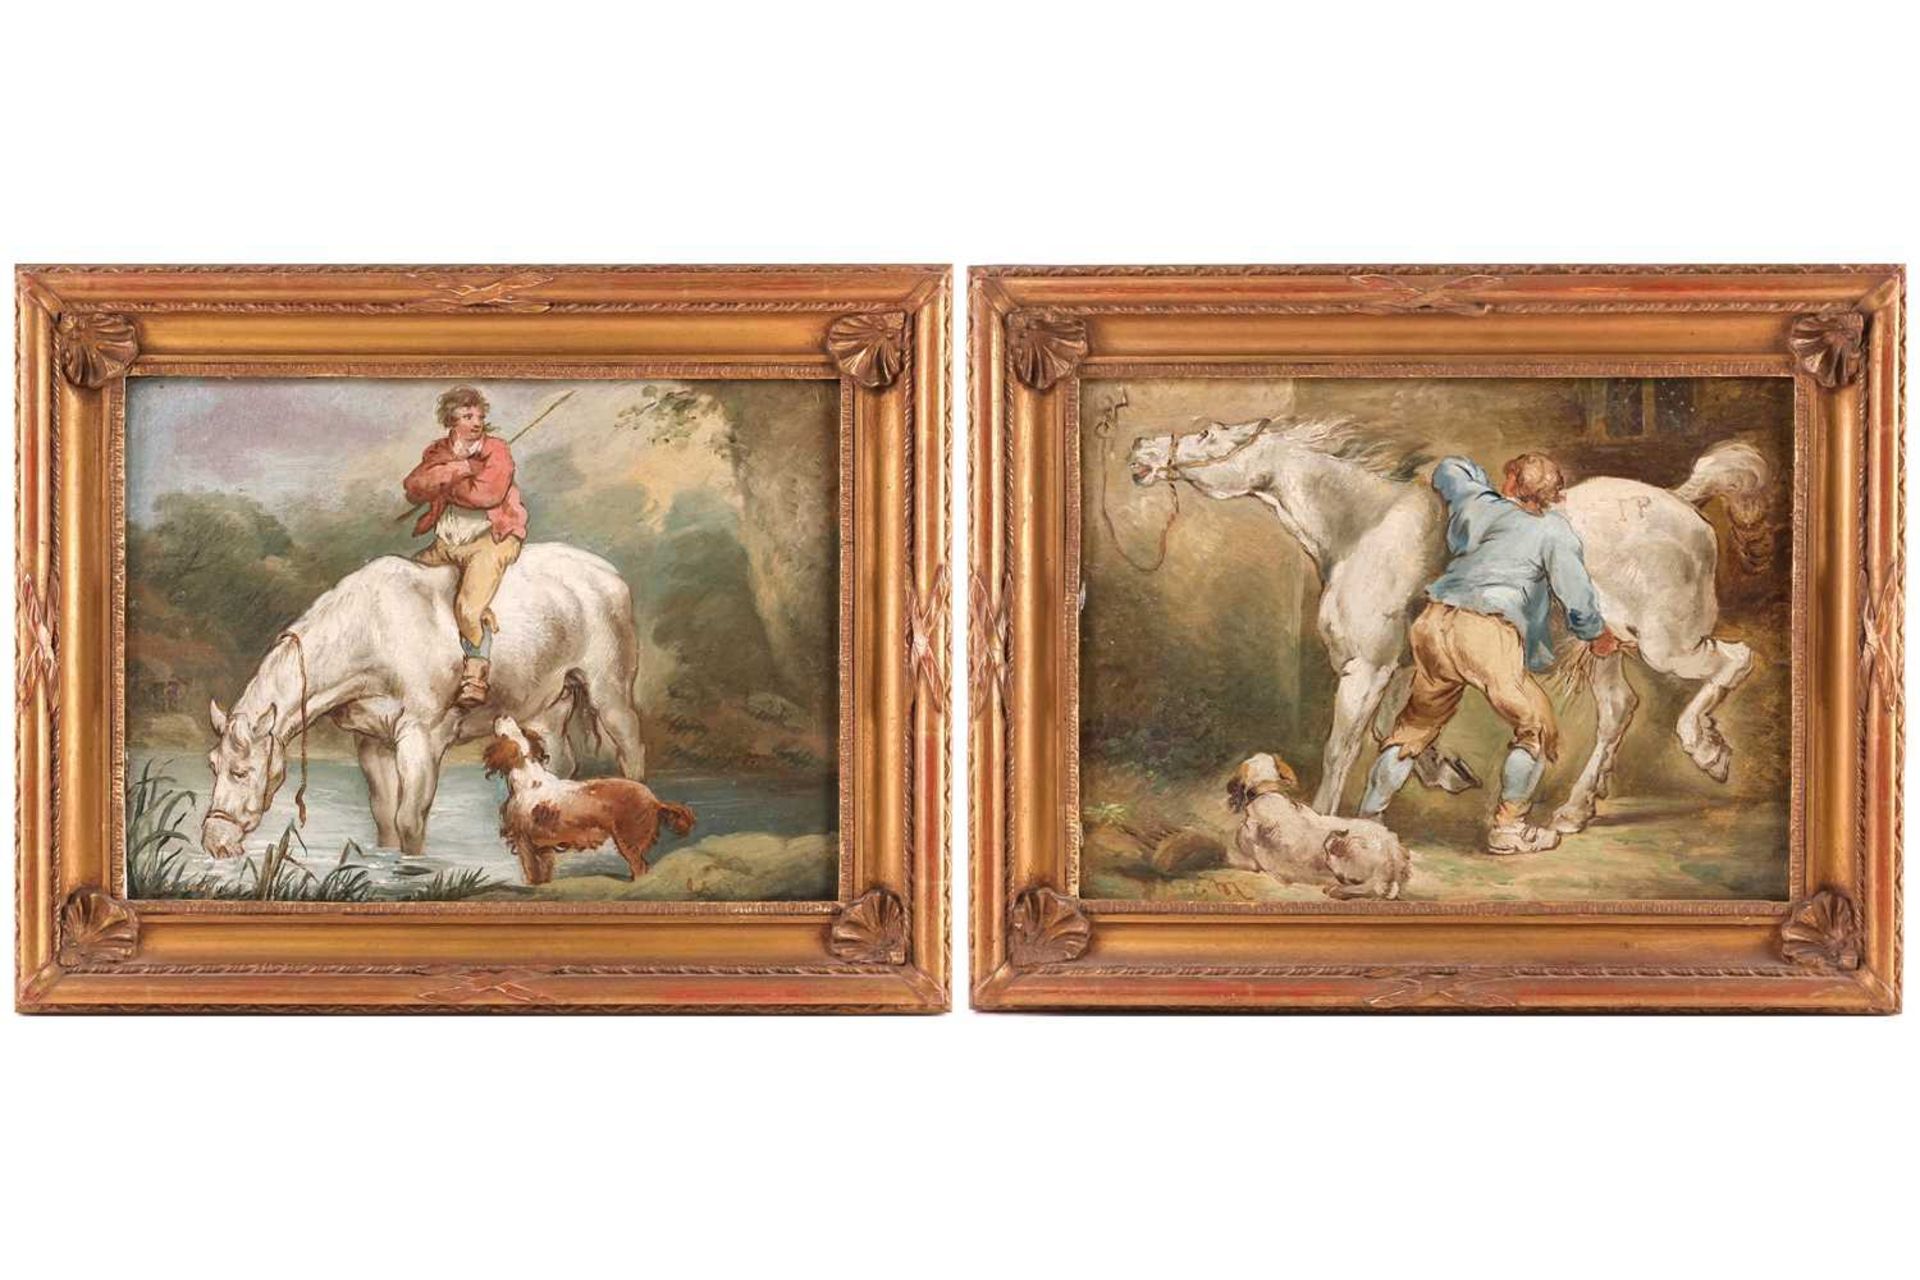 Attributed to George Charles Morland (1762-1804), Horse and Rider, initialled ‘GM’, a pair of oils